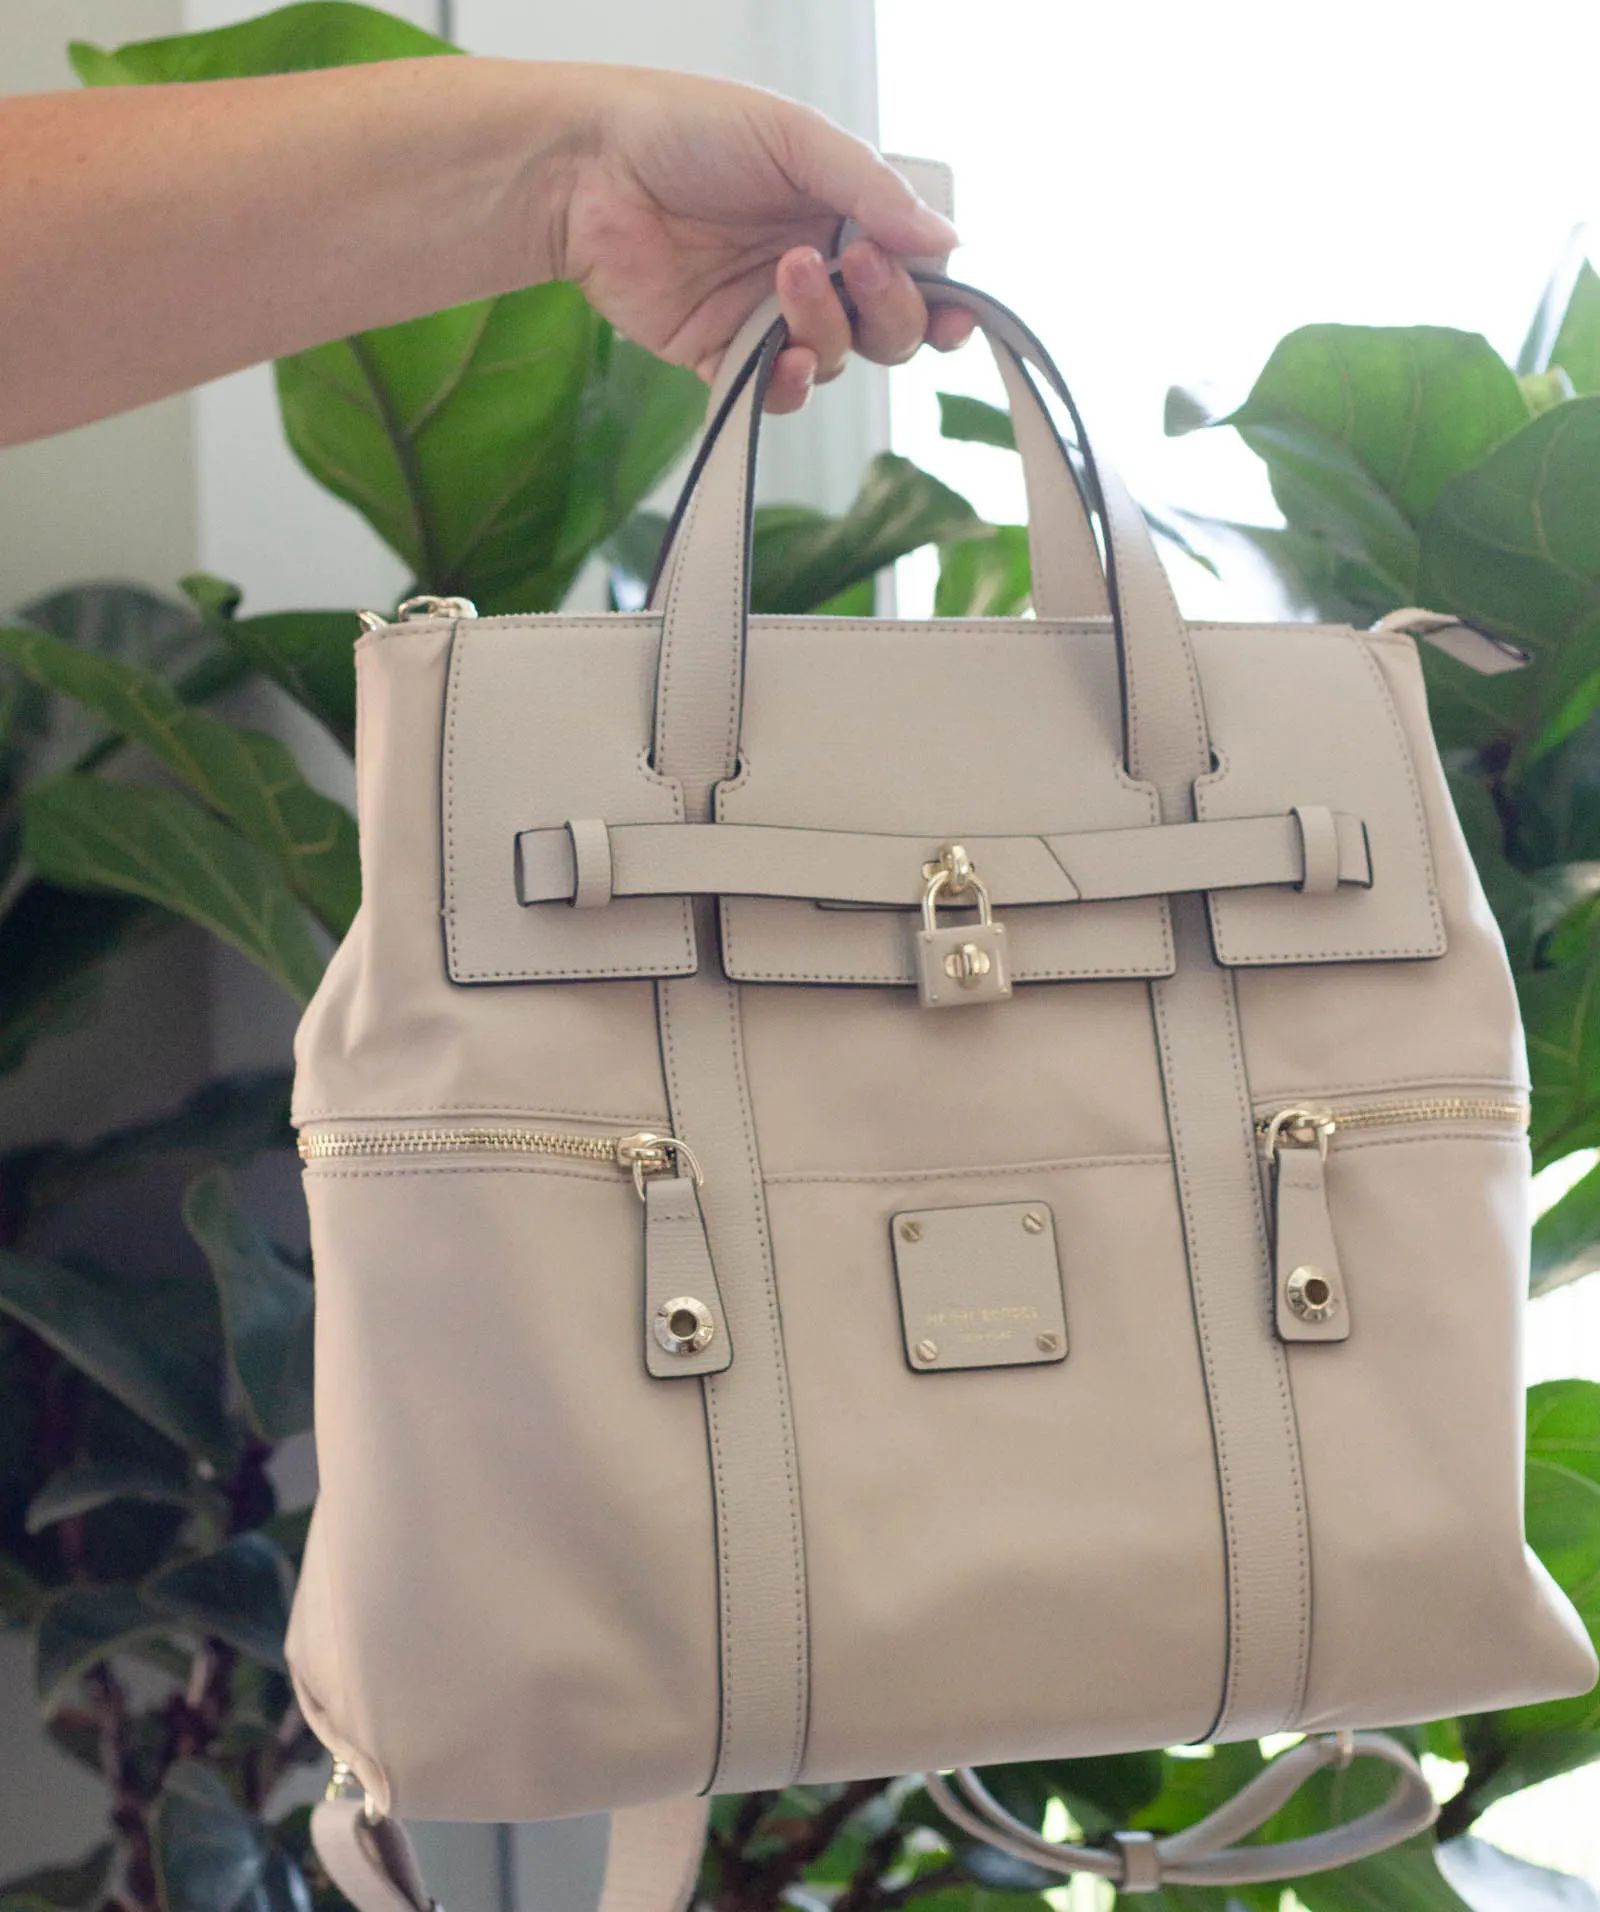 Henri Bendel Jetsetter backpack review by Jane of Chic Everywhere